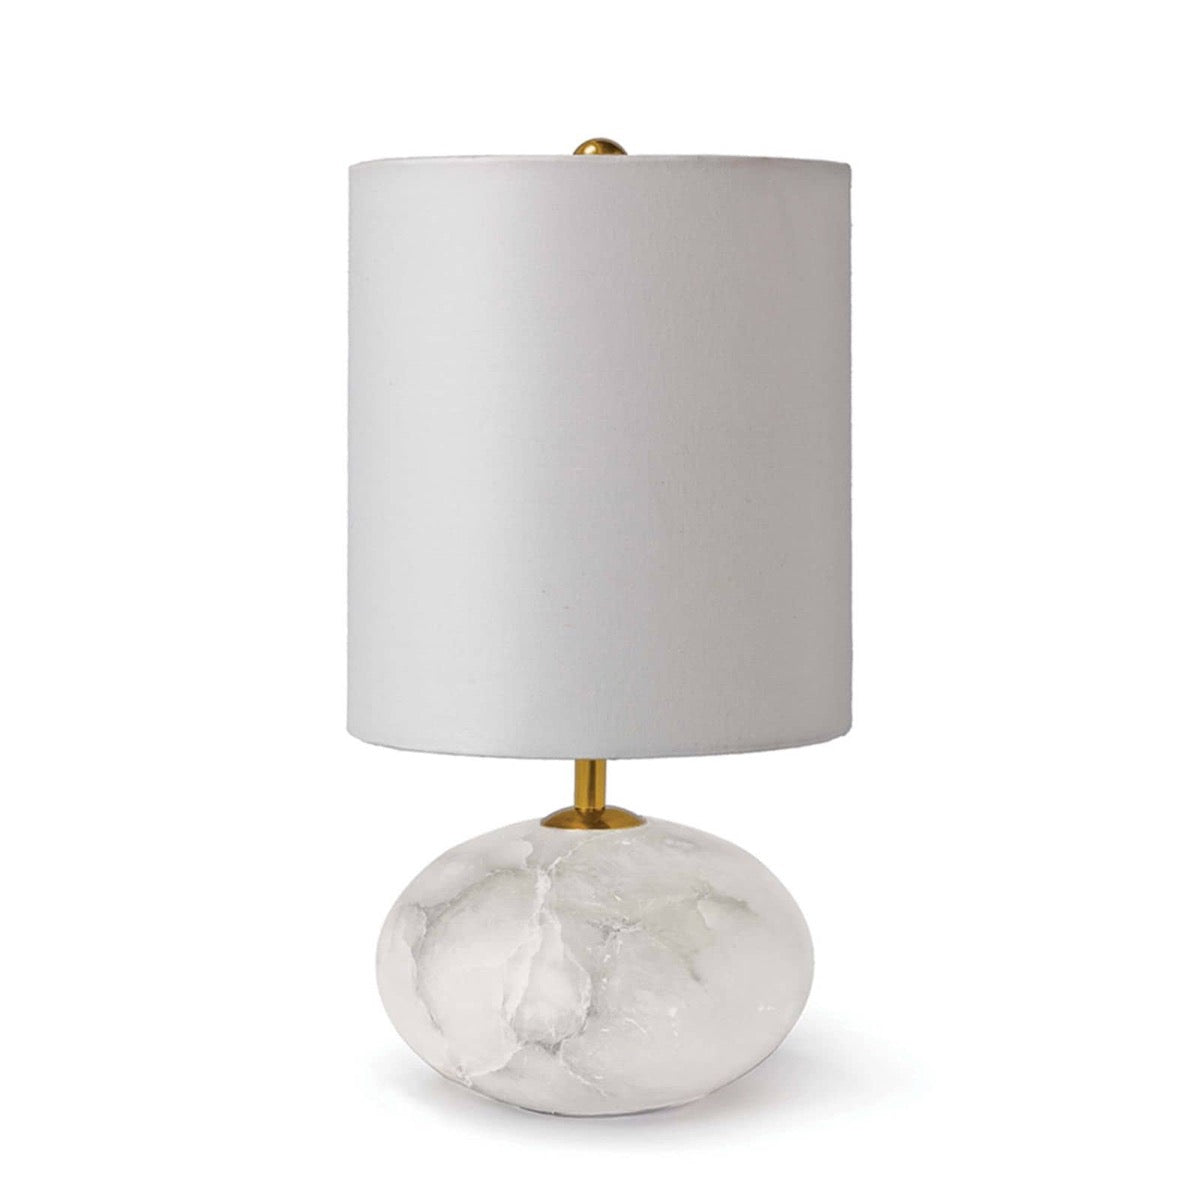 Alabaster Petite Orb Lamp. Front view.